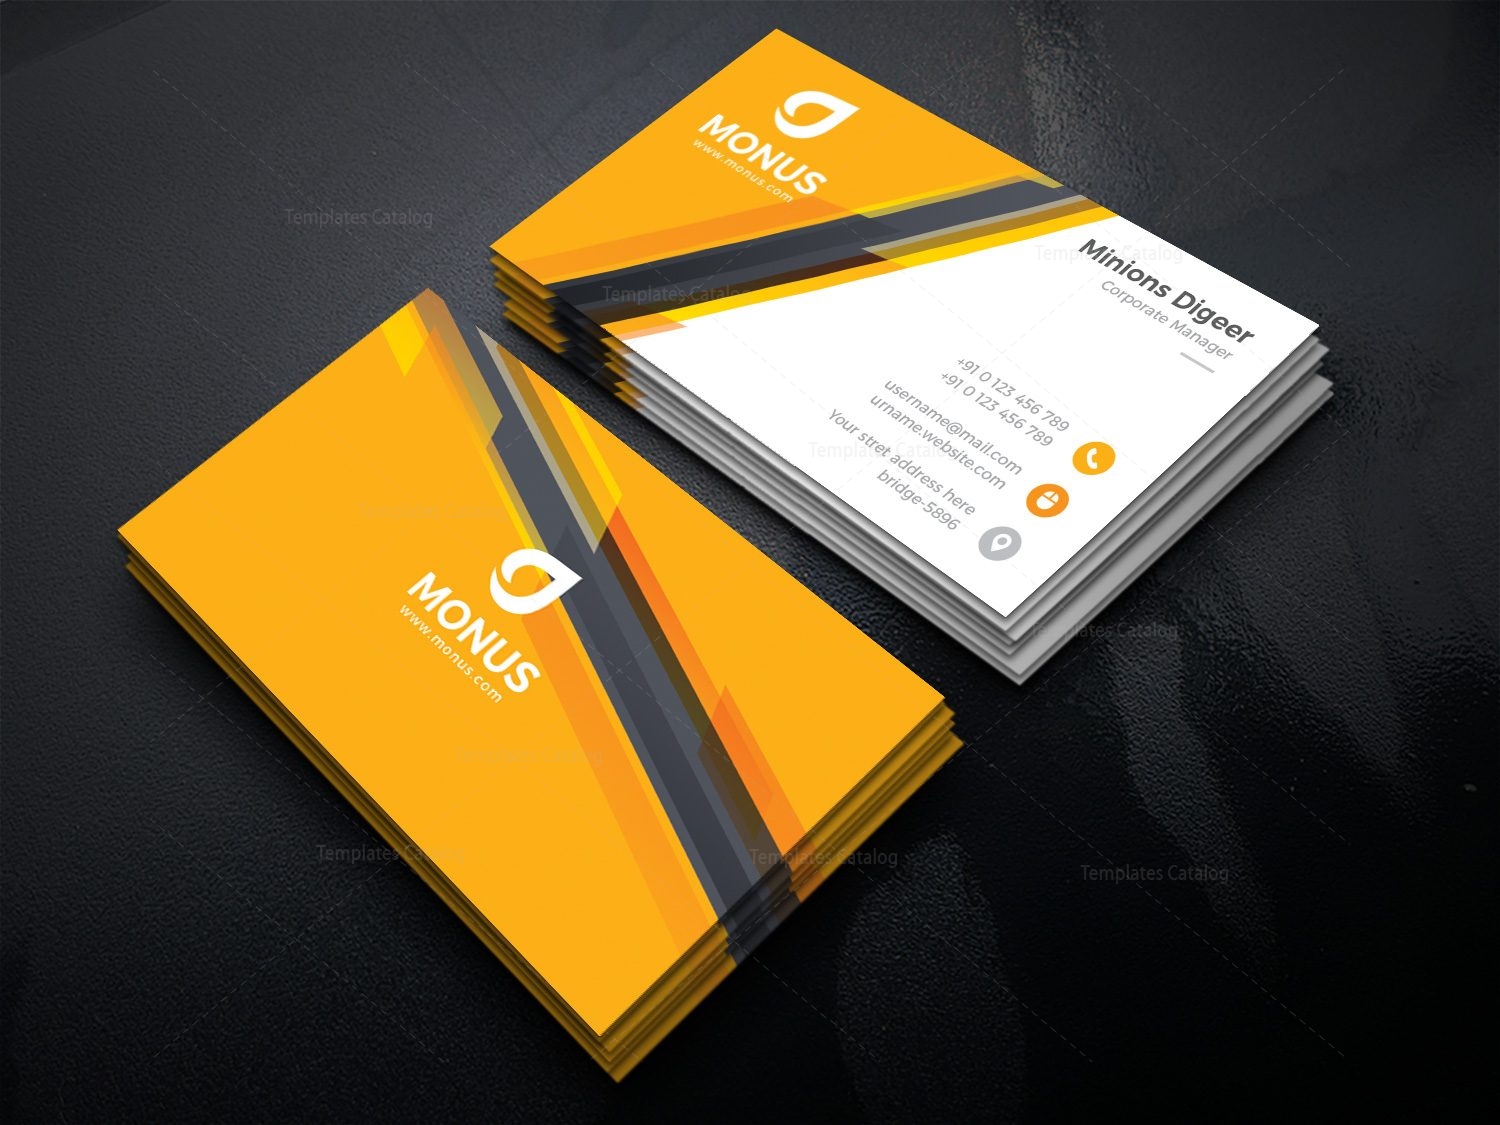 Awesome Corporate Business Card Design Template 001585 - Template Catalog